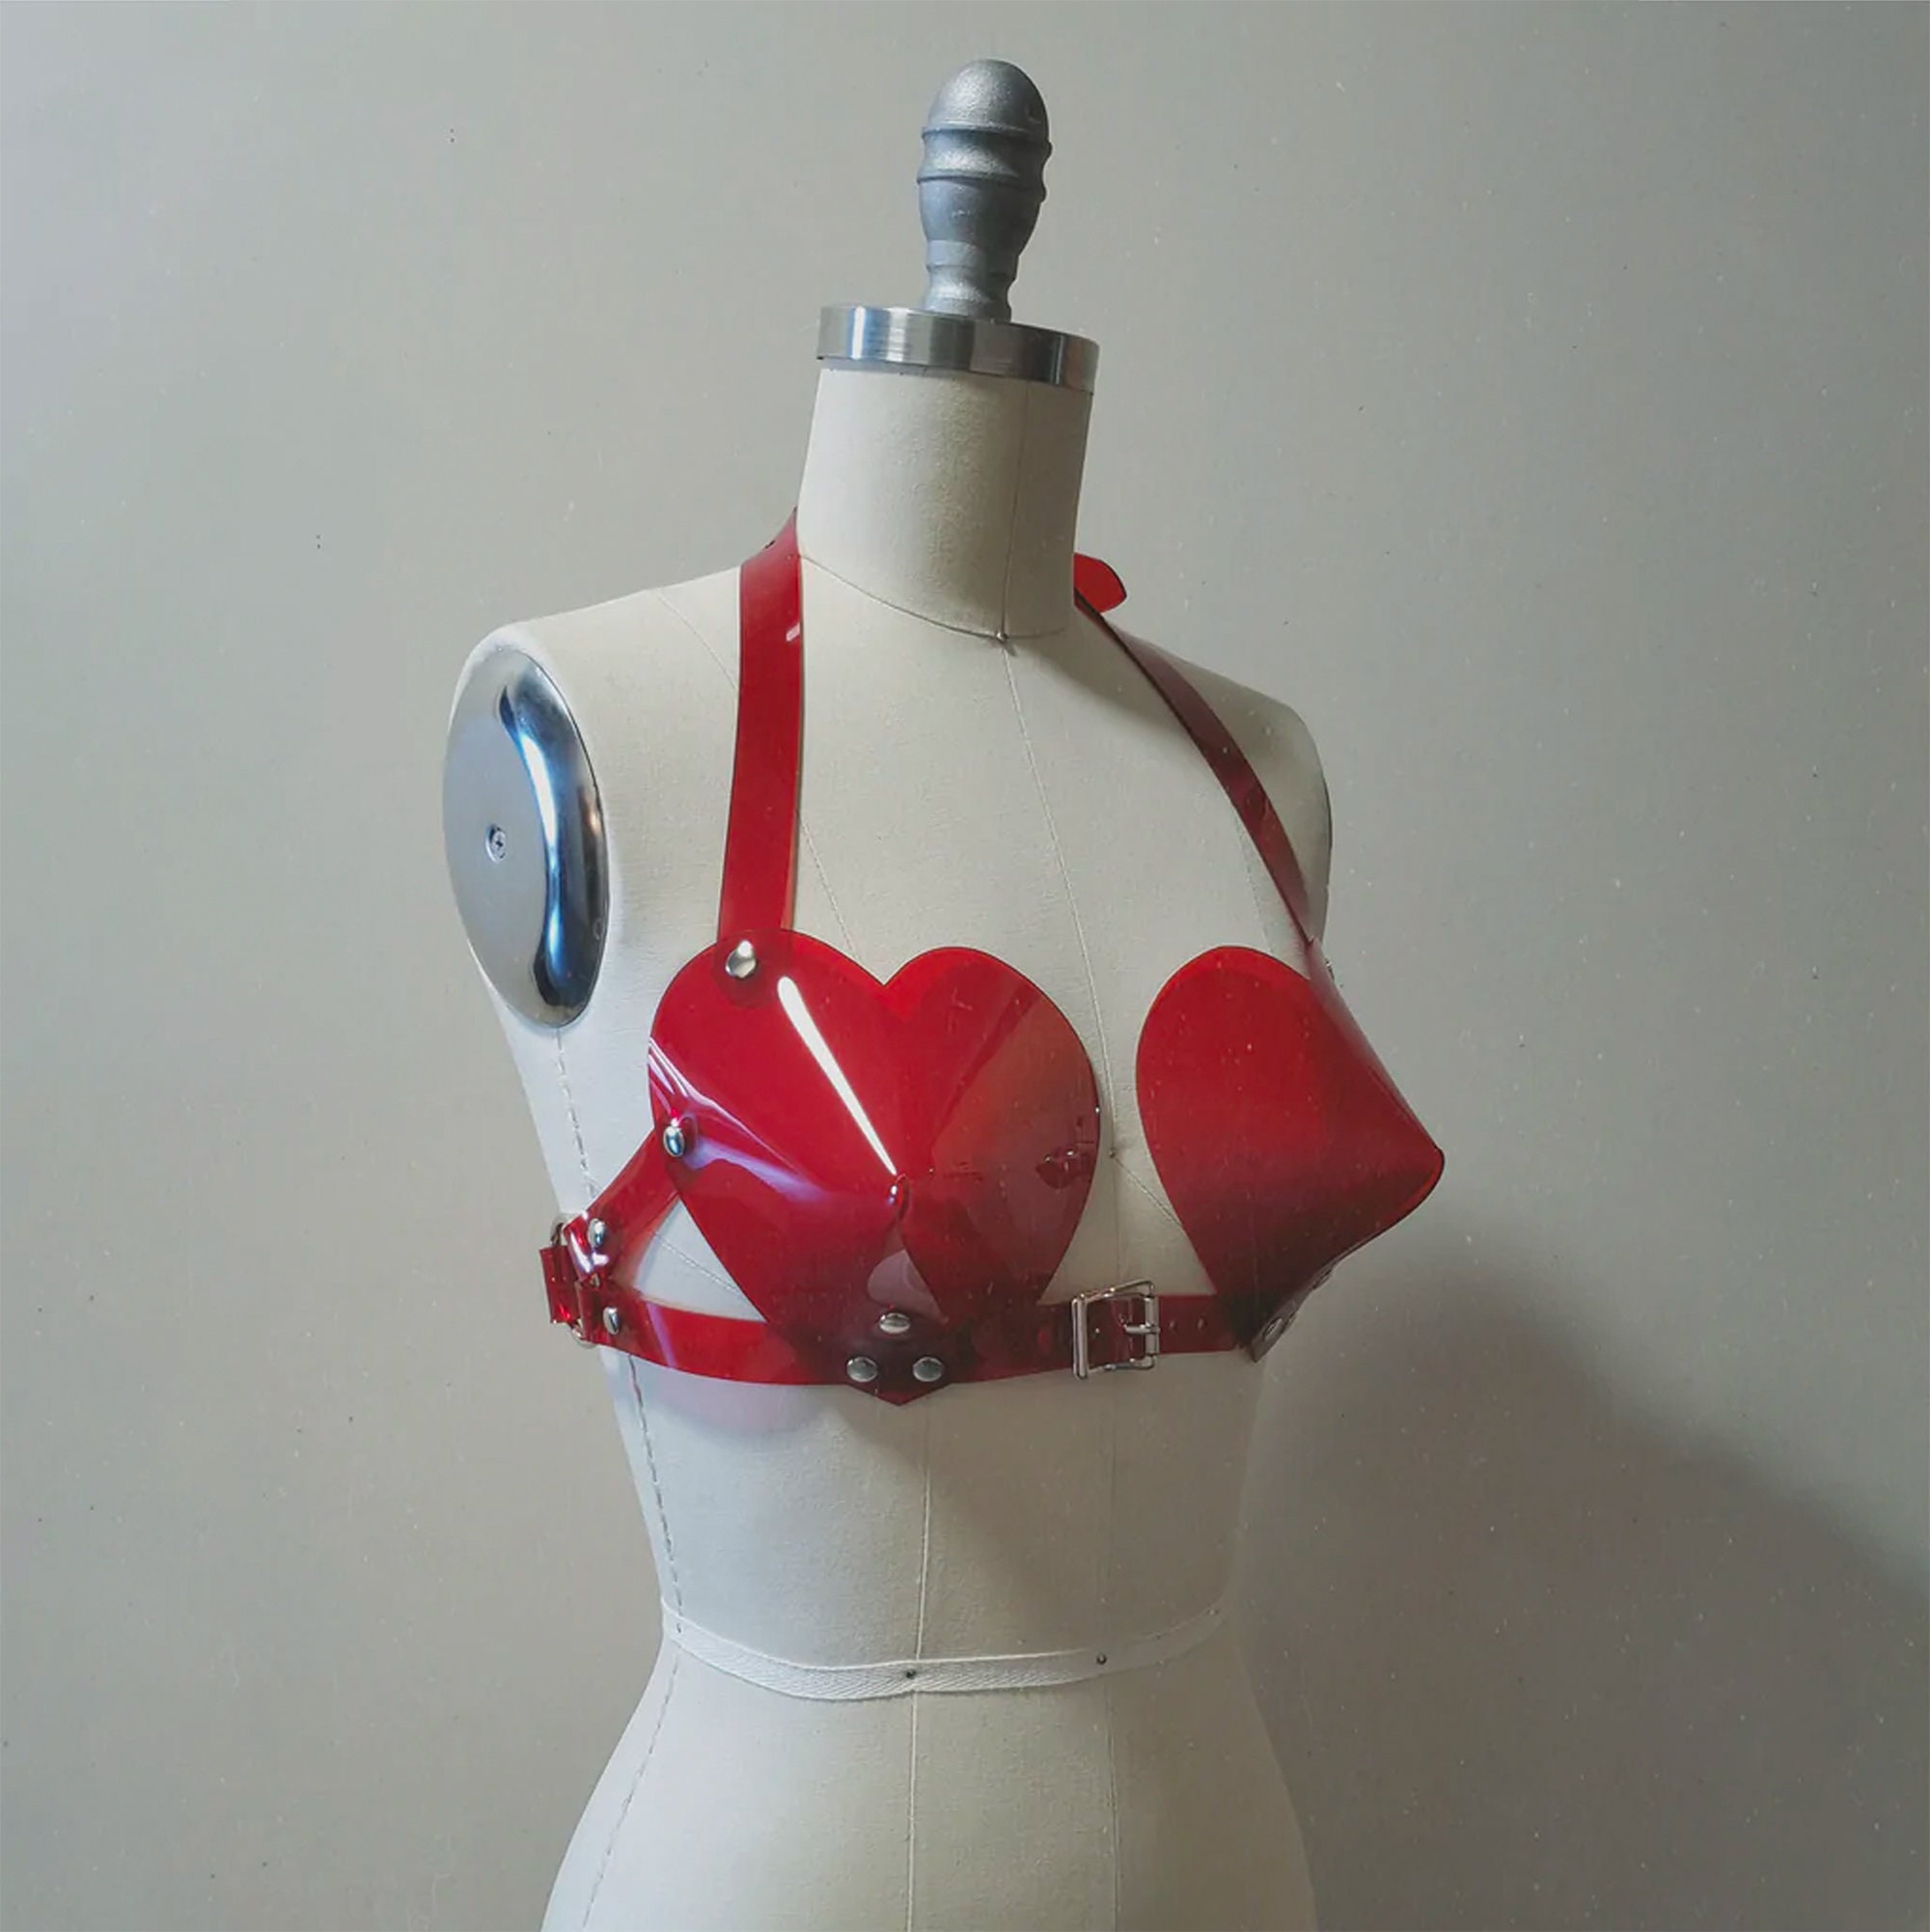 Heart Shaped Harness, Cone Bra, Pvc Halter Top, Retro Bullet Bra, Vegan  Leather, Gothic Rave, Pastelgoth Kawaii, Valentine's Day, Red Pink 